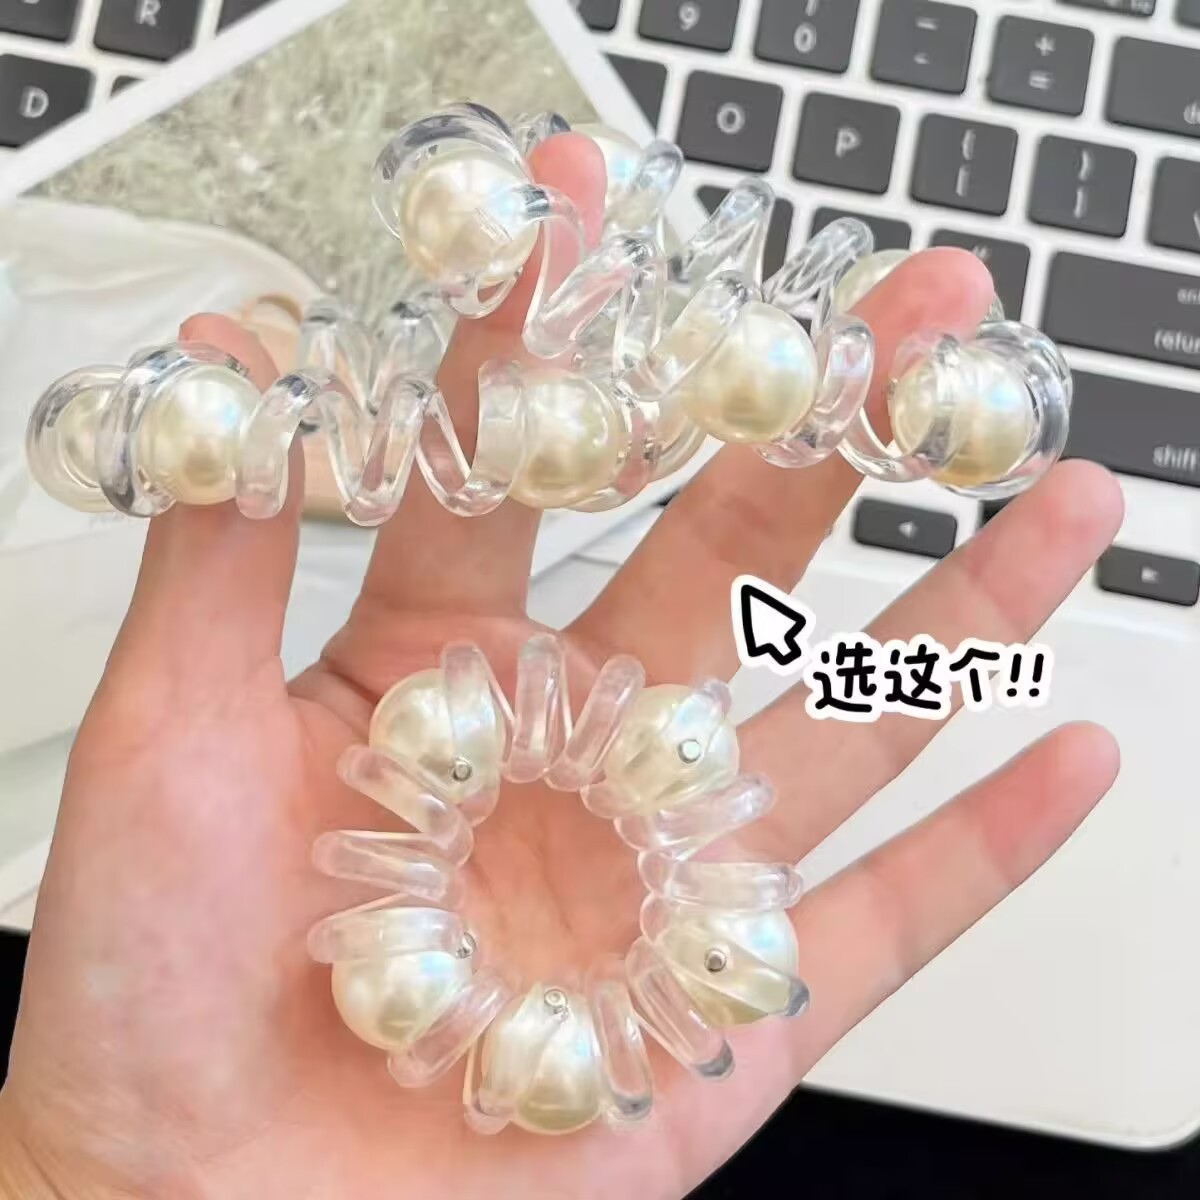 Korean Style New Transparent Thick Pearl Phone Coil Hair Rope Super Fairy Beads Head Rope Rubber Band Hair-Binding Hair Accessories Hair Ring